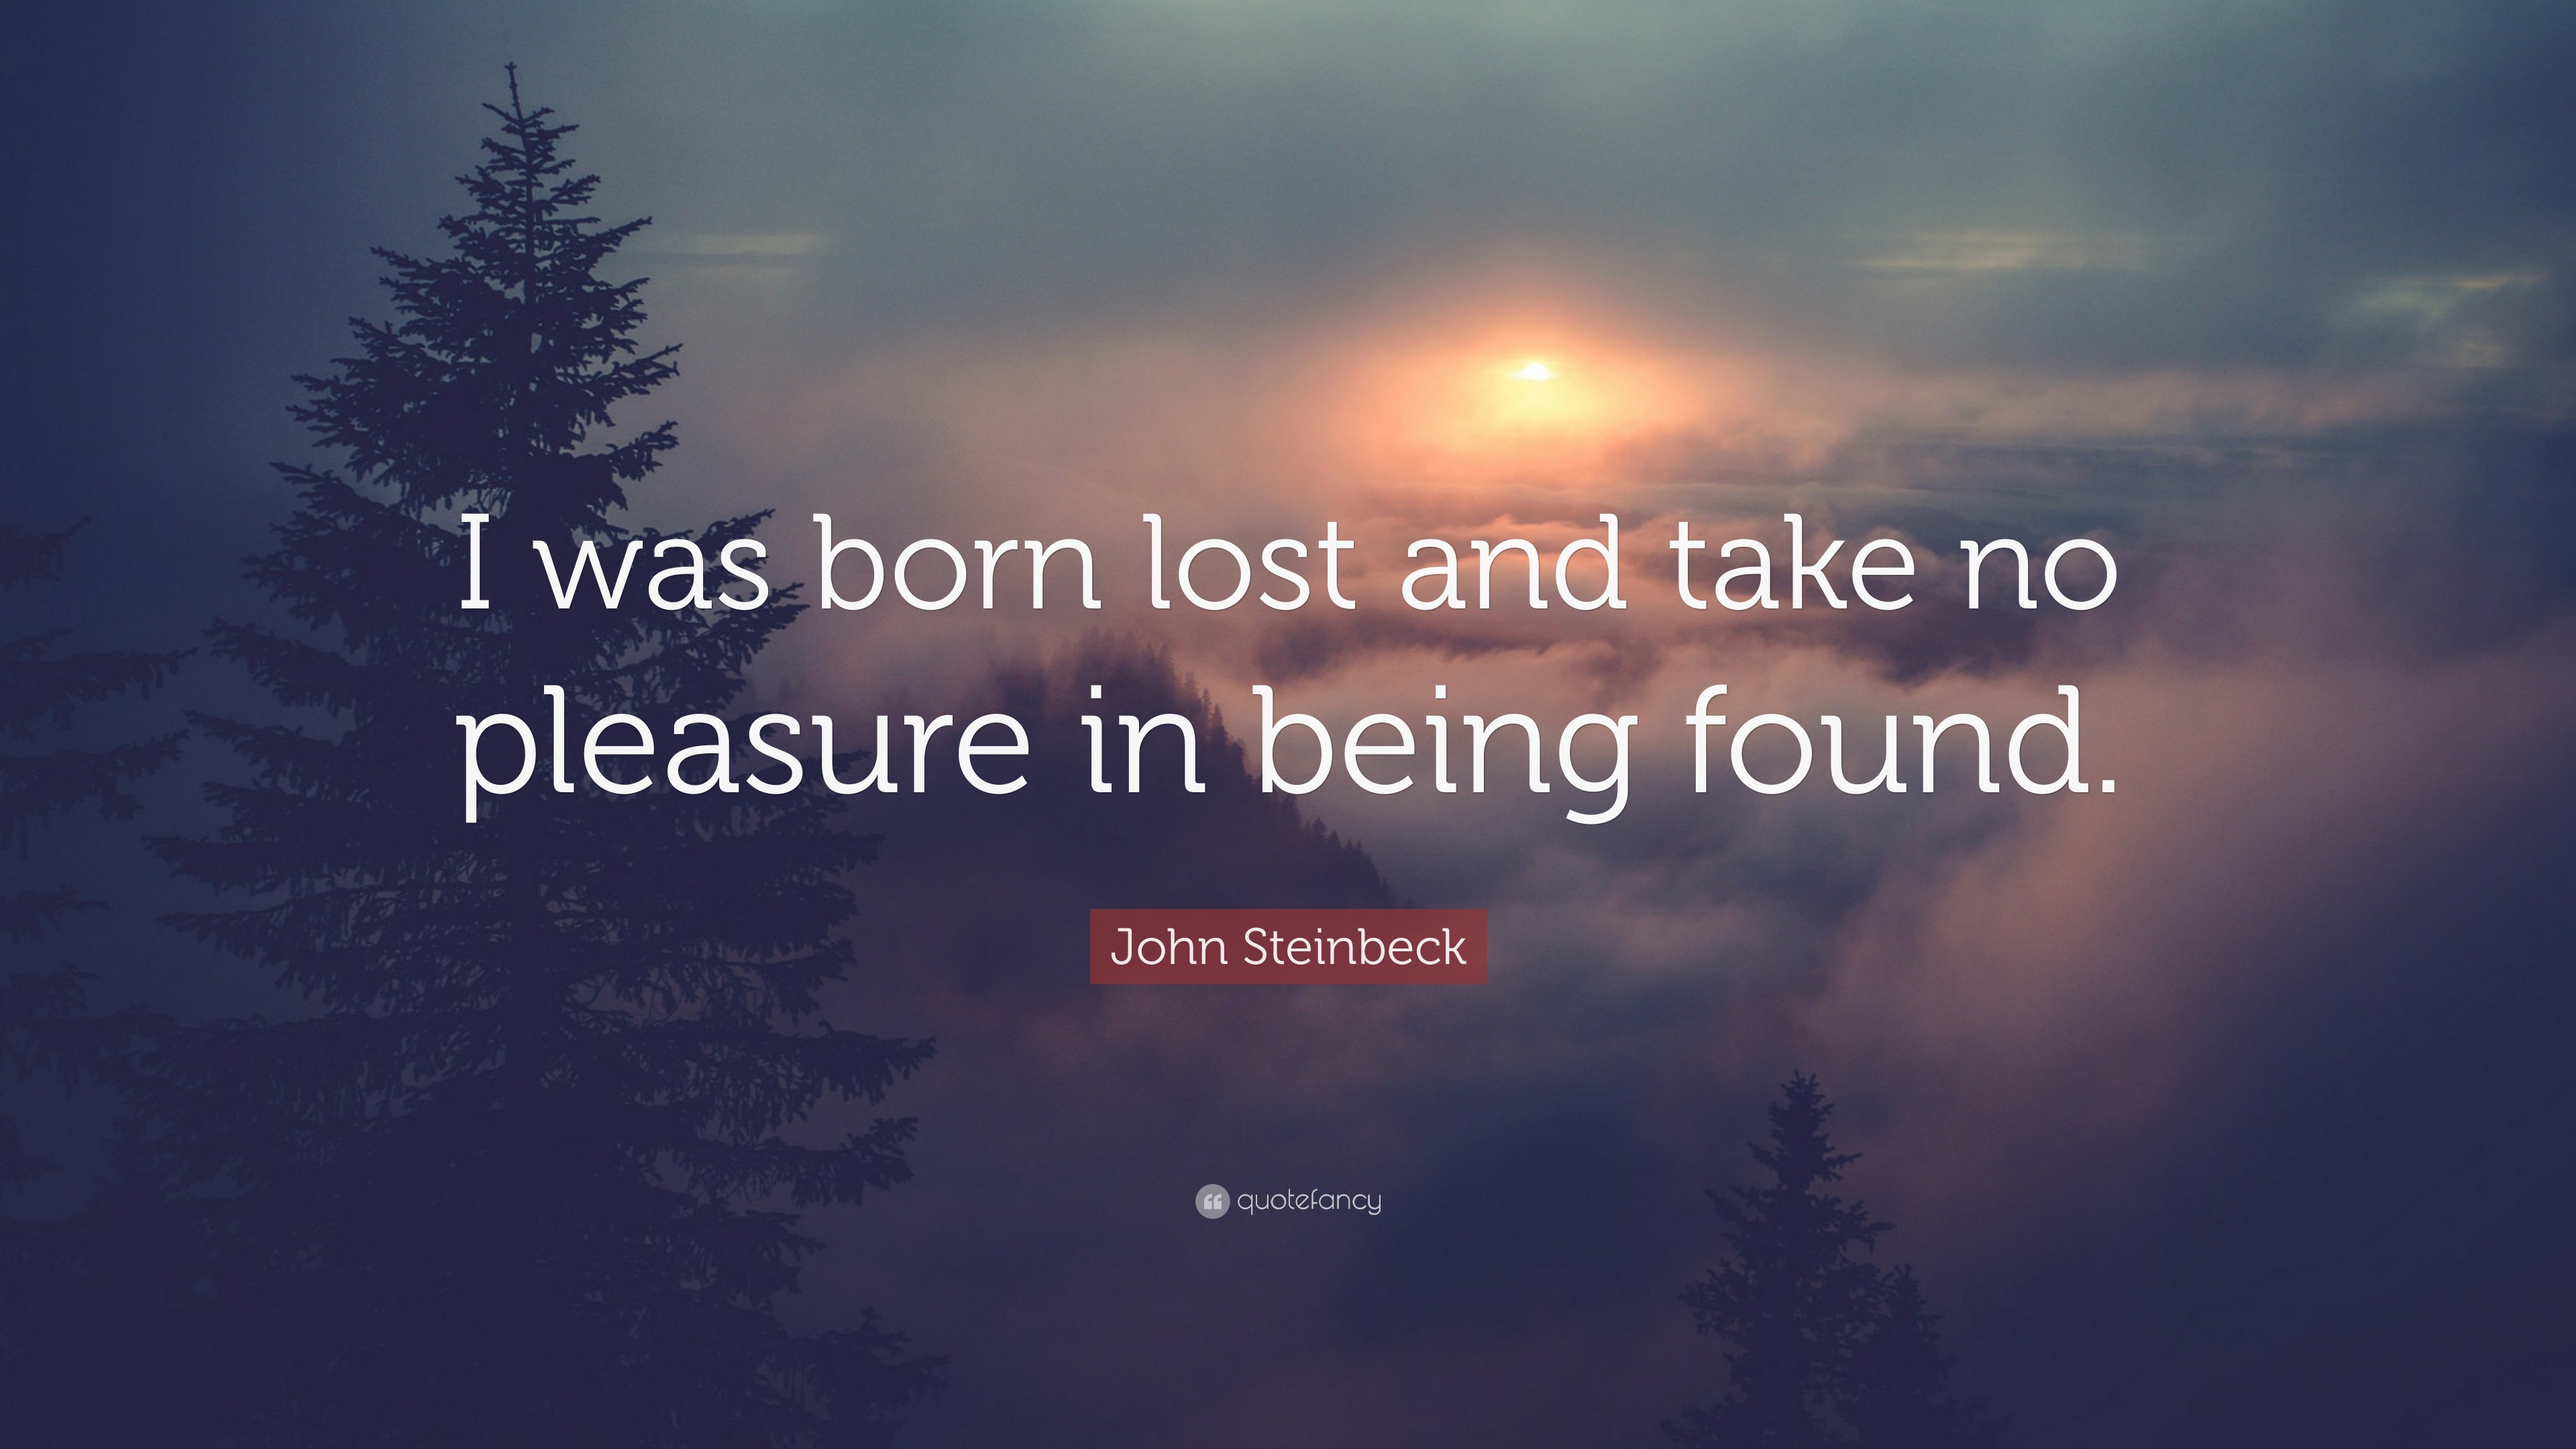 John Steinbeck Quote: “I was born lost and take no pleasure in being ...